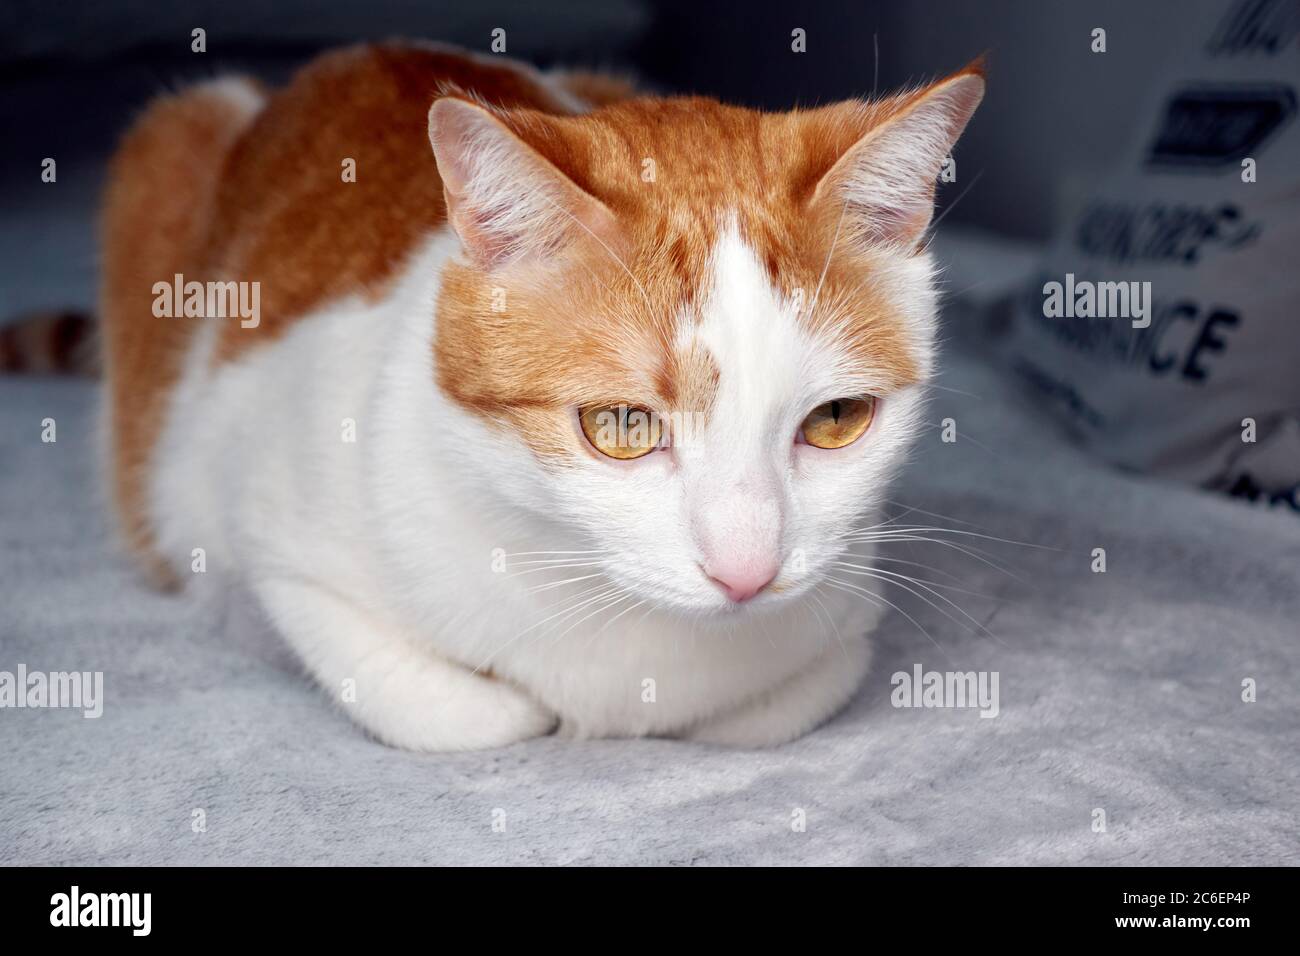 Closeup portrait of ginger cat lying on a bed and looking straight ahead directly into the camera against dark blurred background. Tranquility and rel Stock Photo